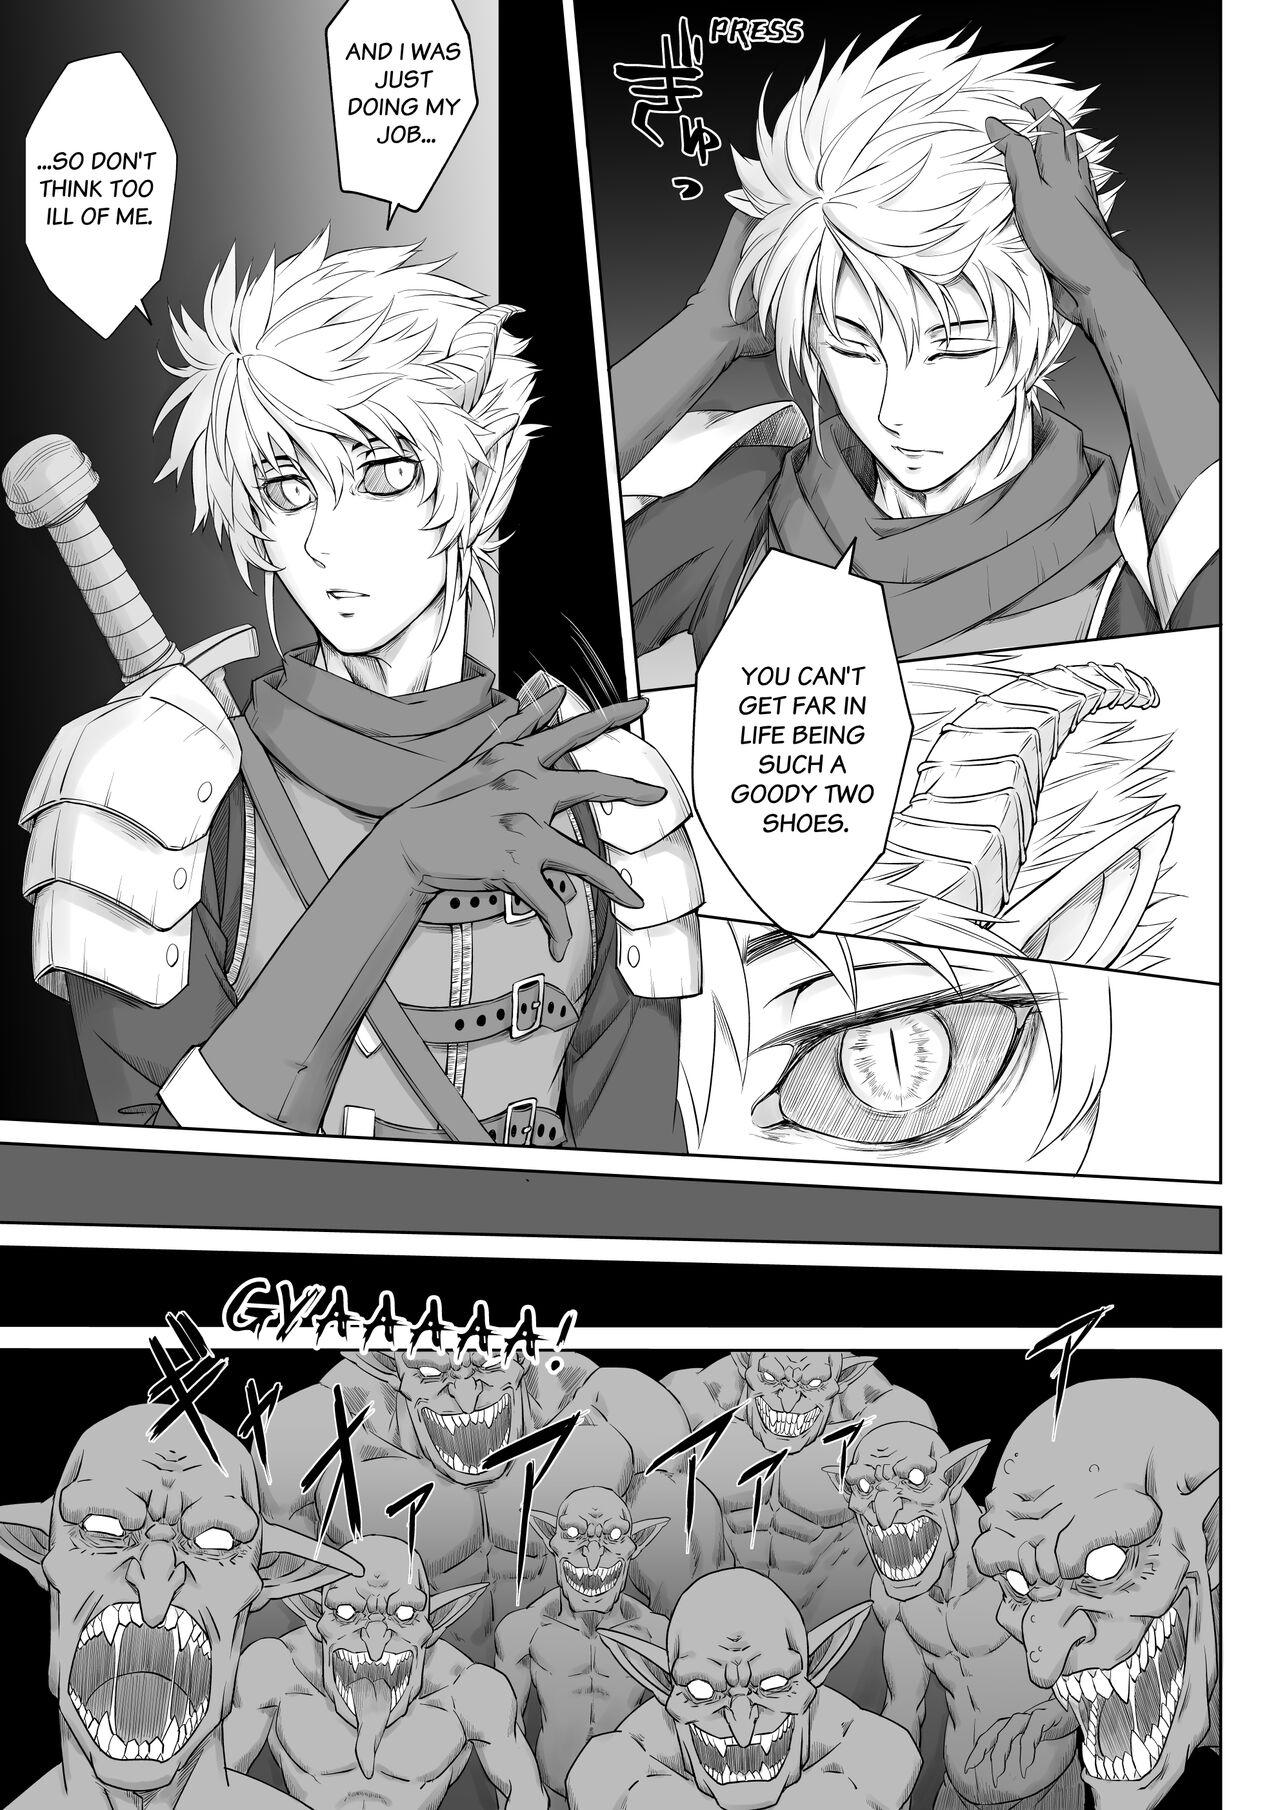 Toys Knight of the Labyrinth - Original Chastity - Page 11